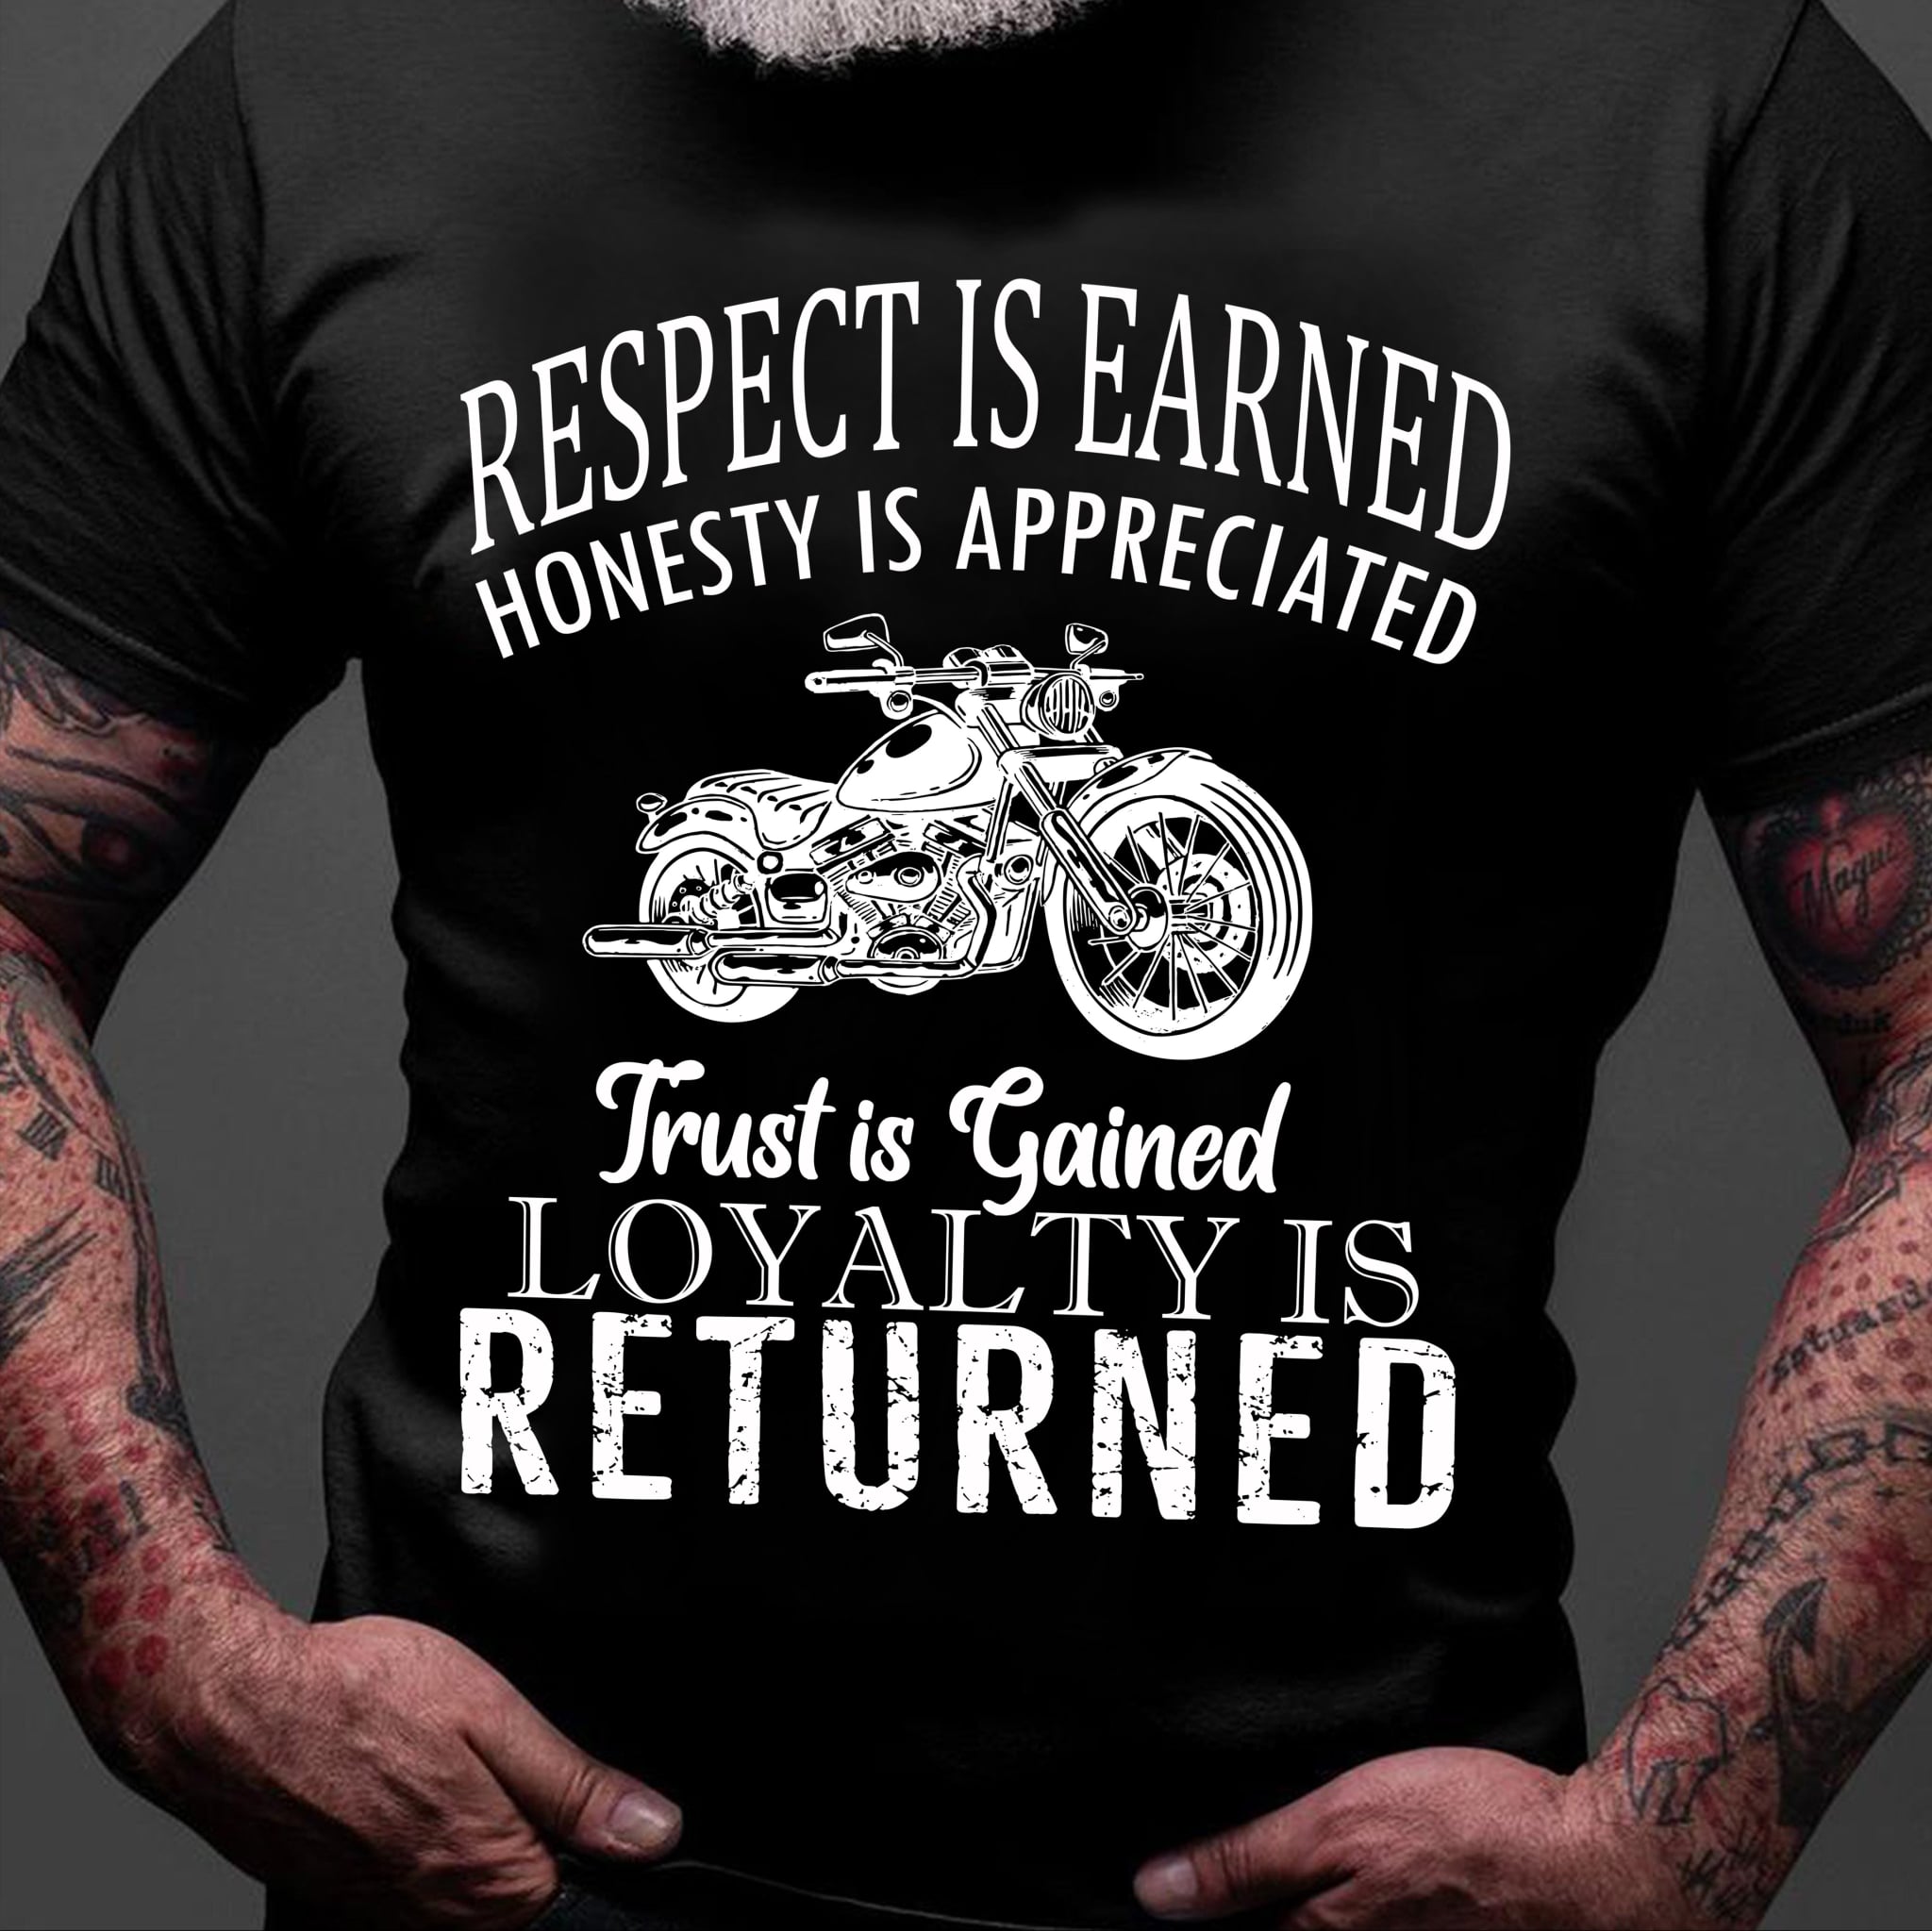 Respect is earned honesty is aprreciated trust is gained loyalty is returned - Motorcycles lover